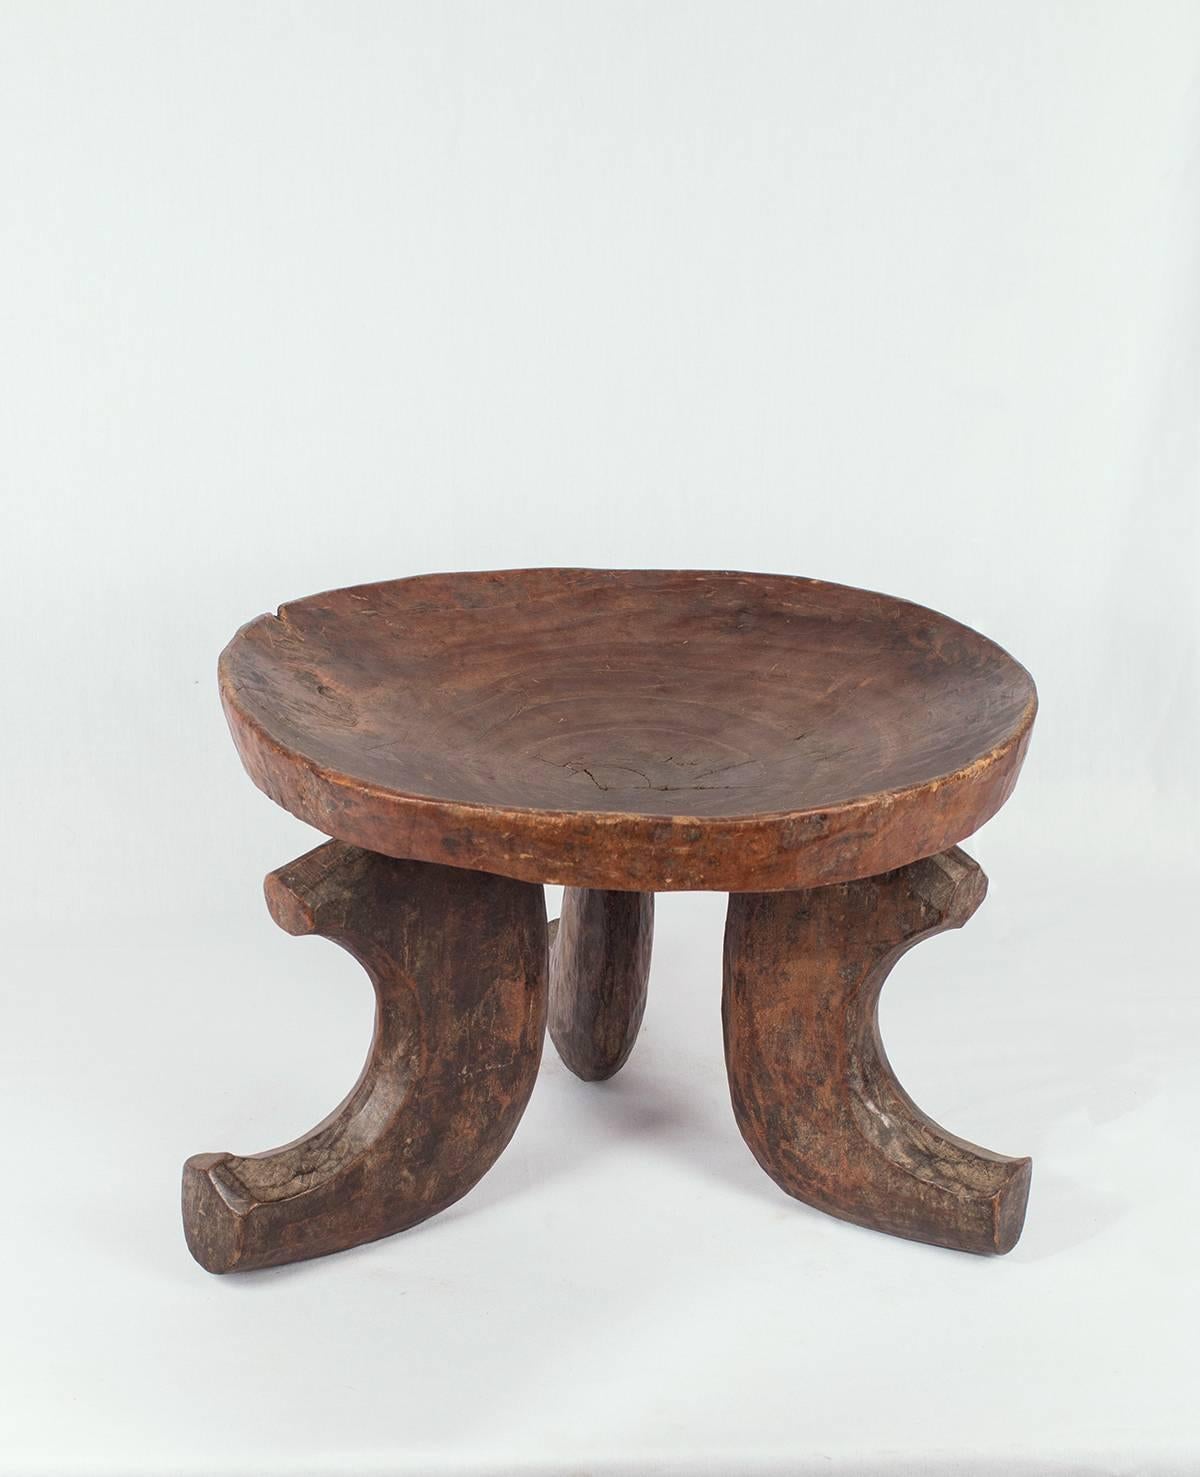 Probably from the Jimma people of Ethiopia, this hand-carved stool is simple but elegant and are noted for their deep, concave surface. They feature a tripod – 3 legged design unique to the Jimma area, a forest area in Westen Ethiopia, Africa. This